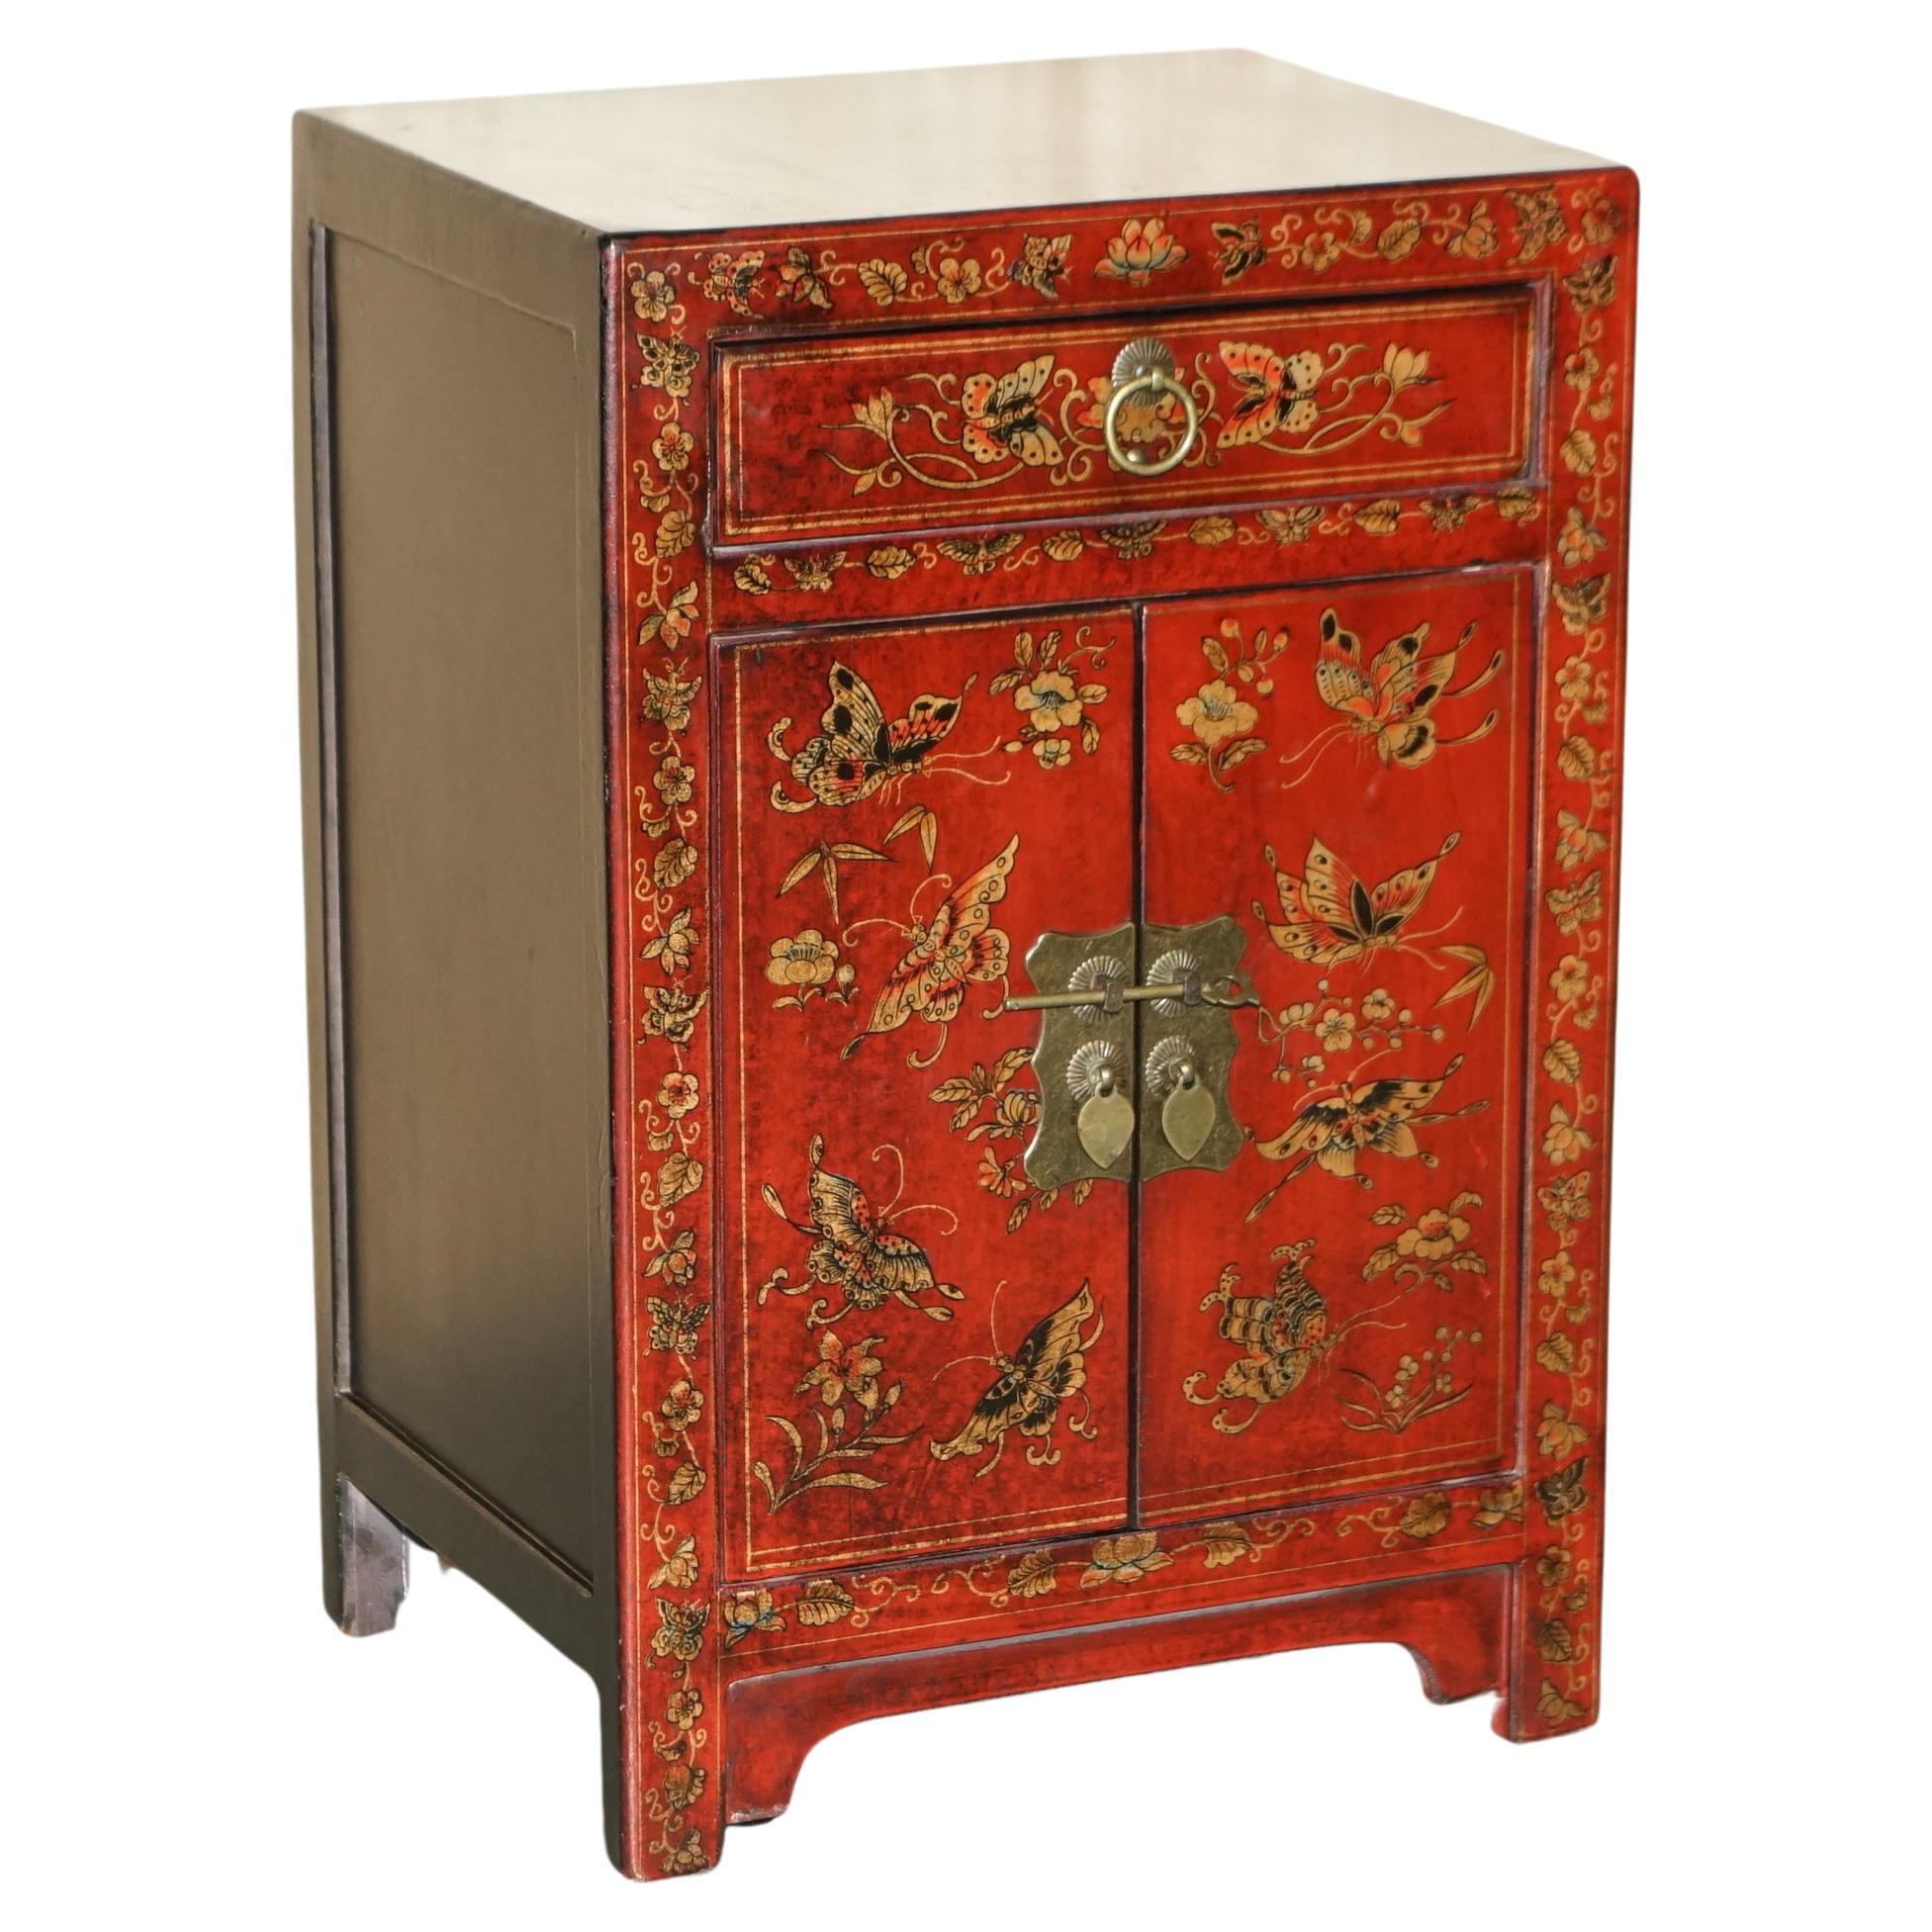 Vintage Chinese Hand Painted Lacquered Side Table Sized Cupboard with Drawer (Table d'appoint chinoise peinte à la main avec tiroir)